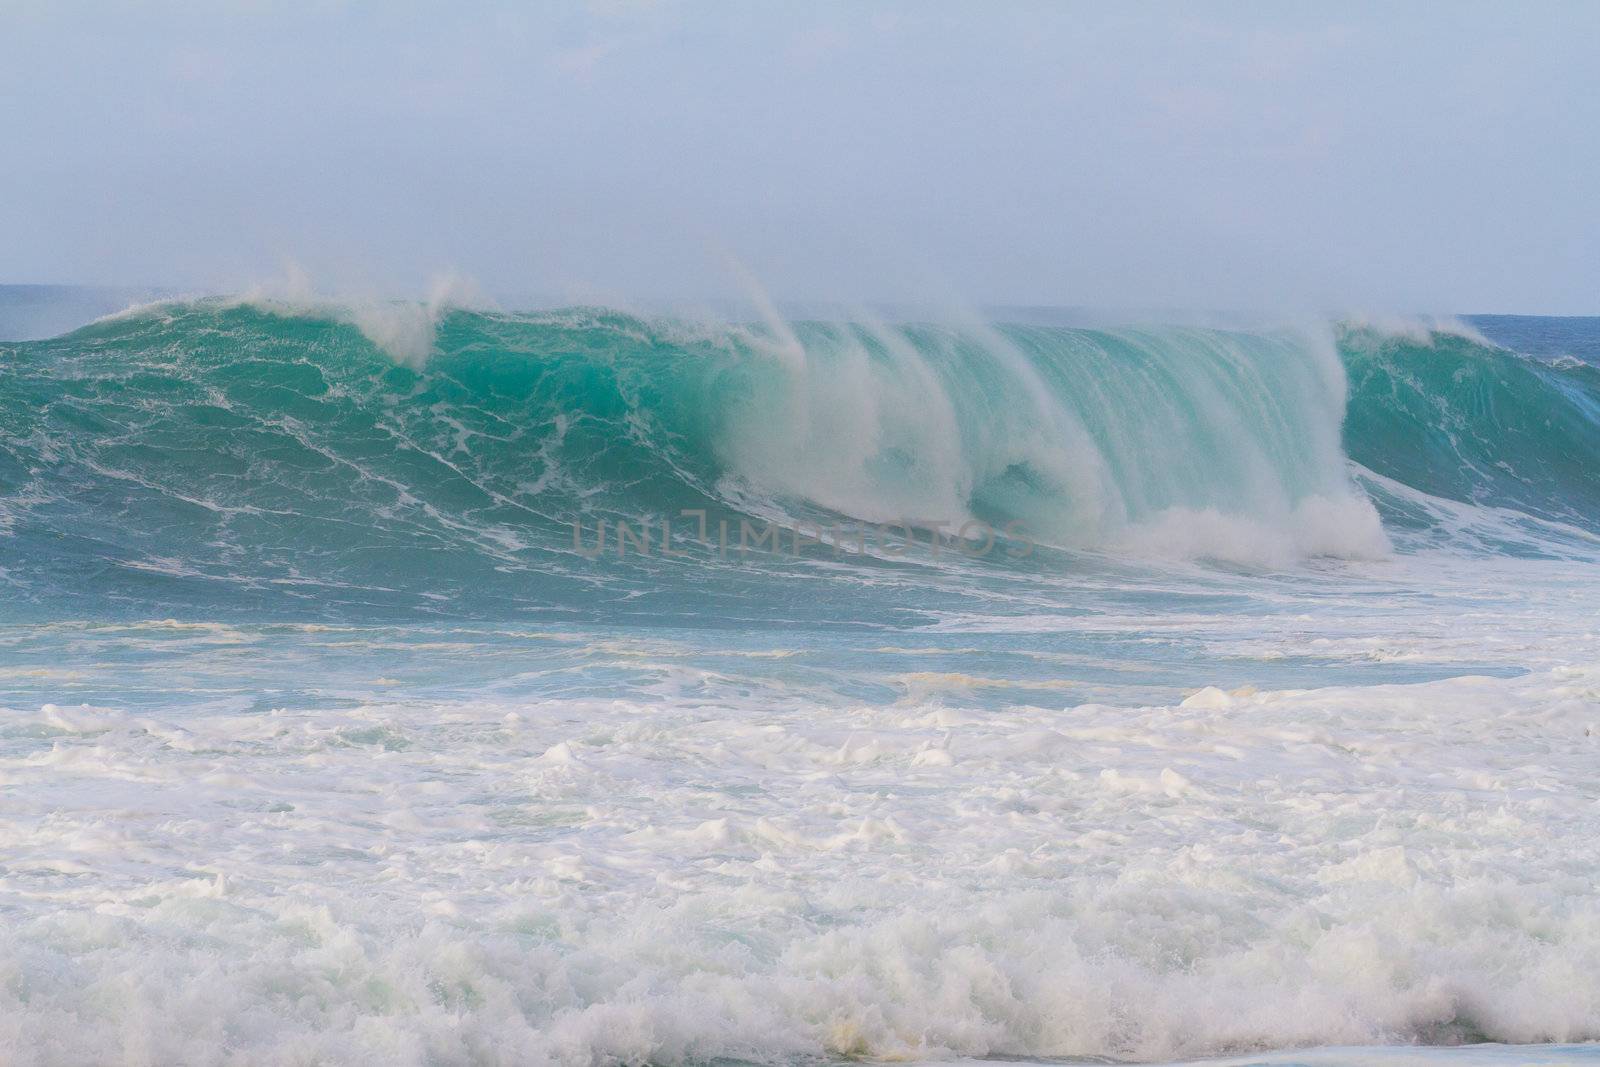 These huge waves with hollow barrels break off the north shore of Oahu in Hawaii during a big storm. These dangerous waves have major rip currents and a lot of power from the ocean but surfers are still lining up to surf.